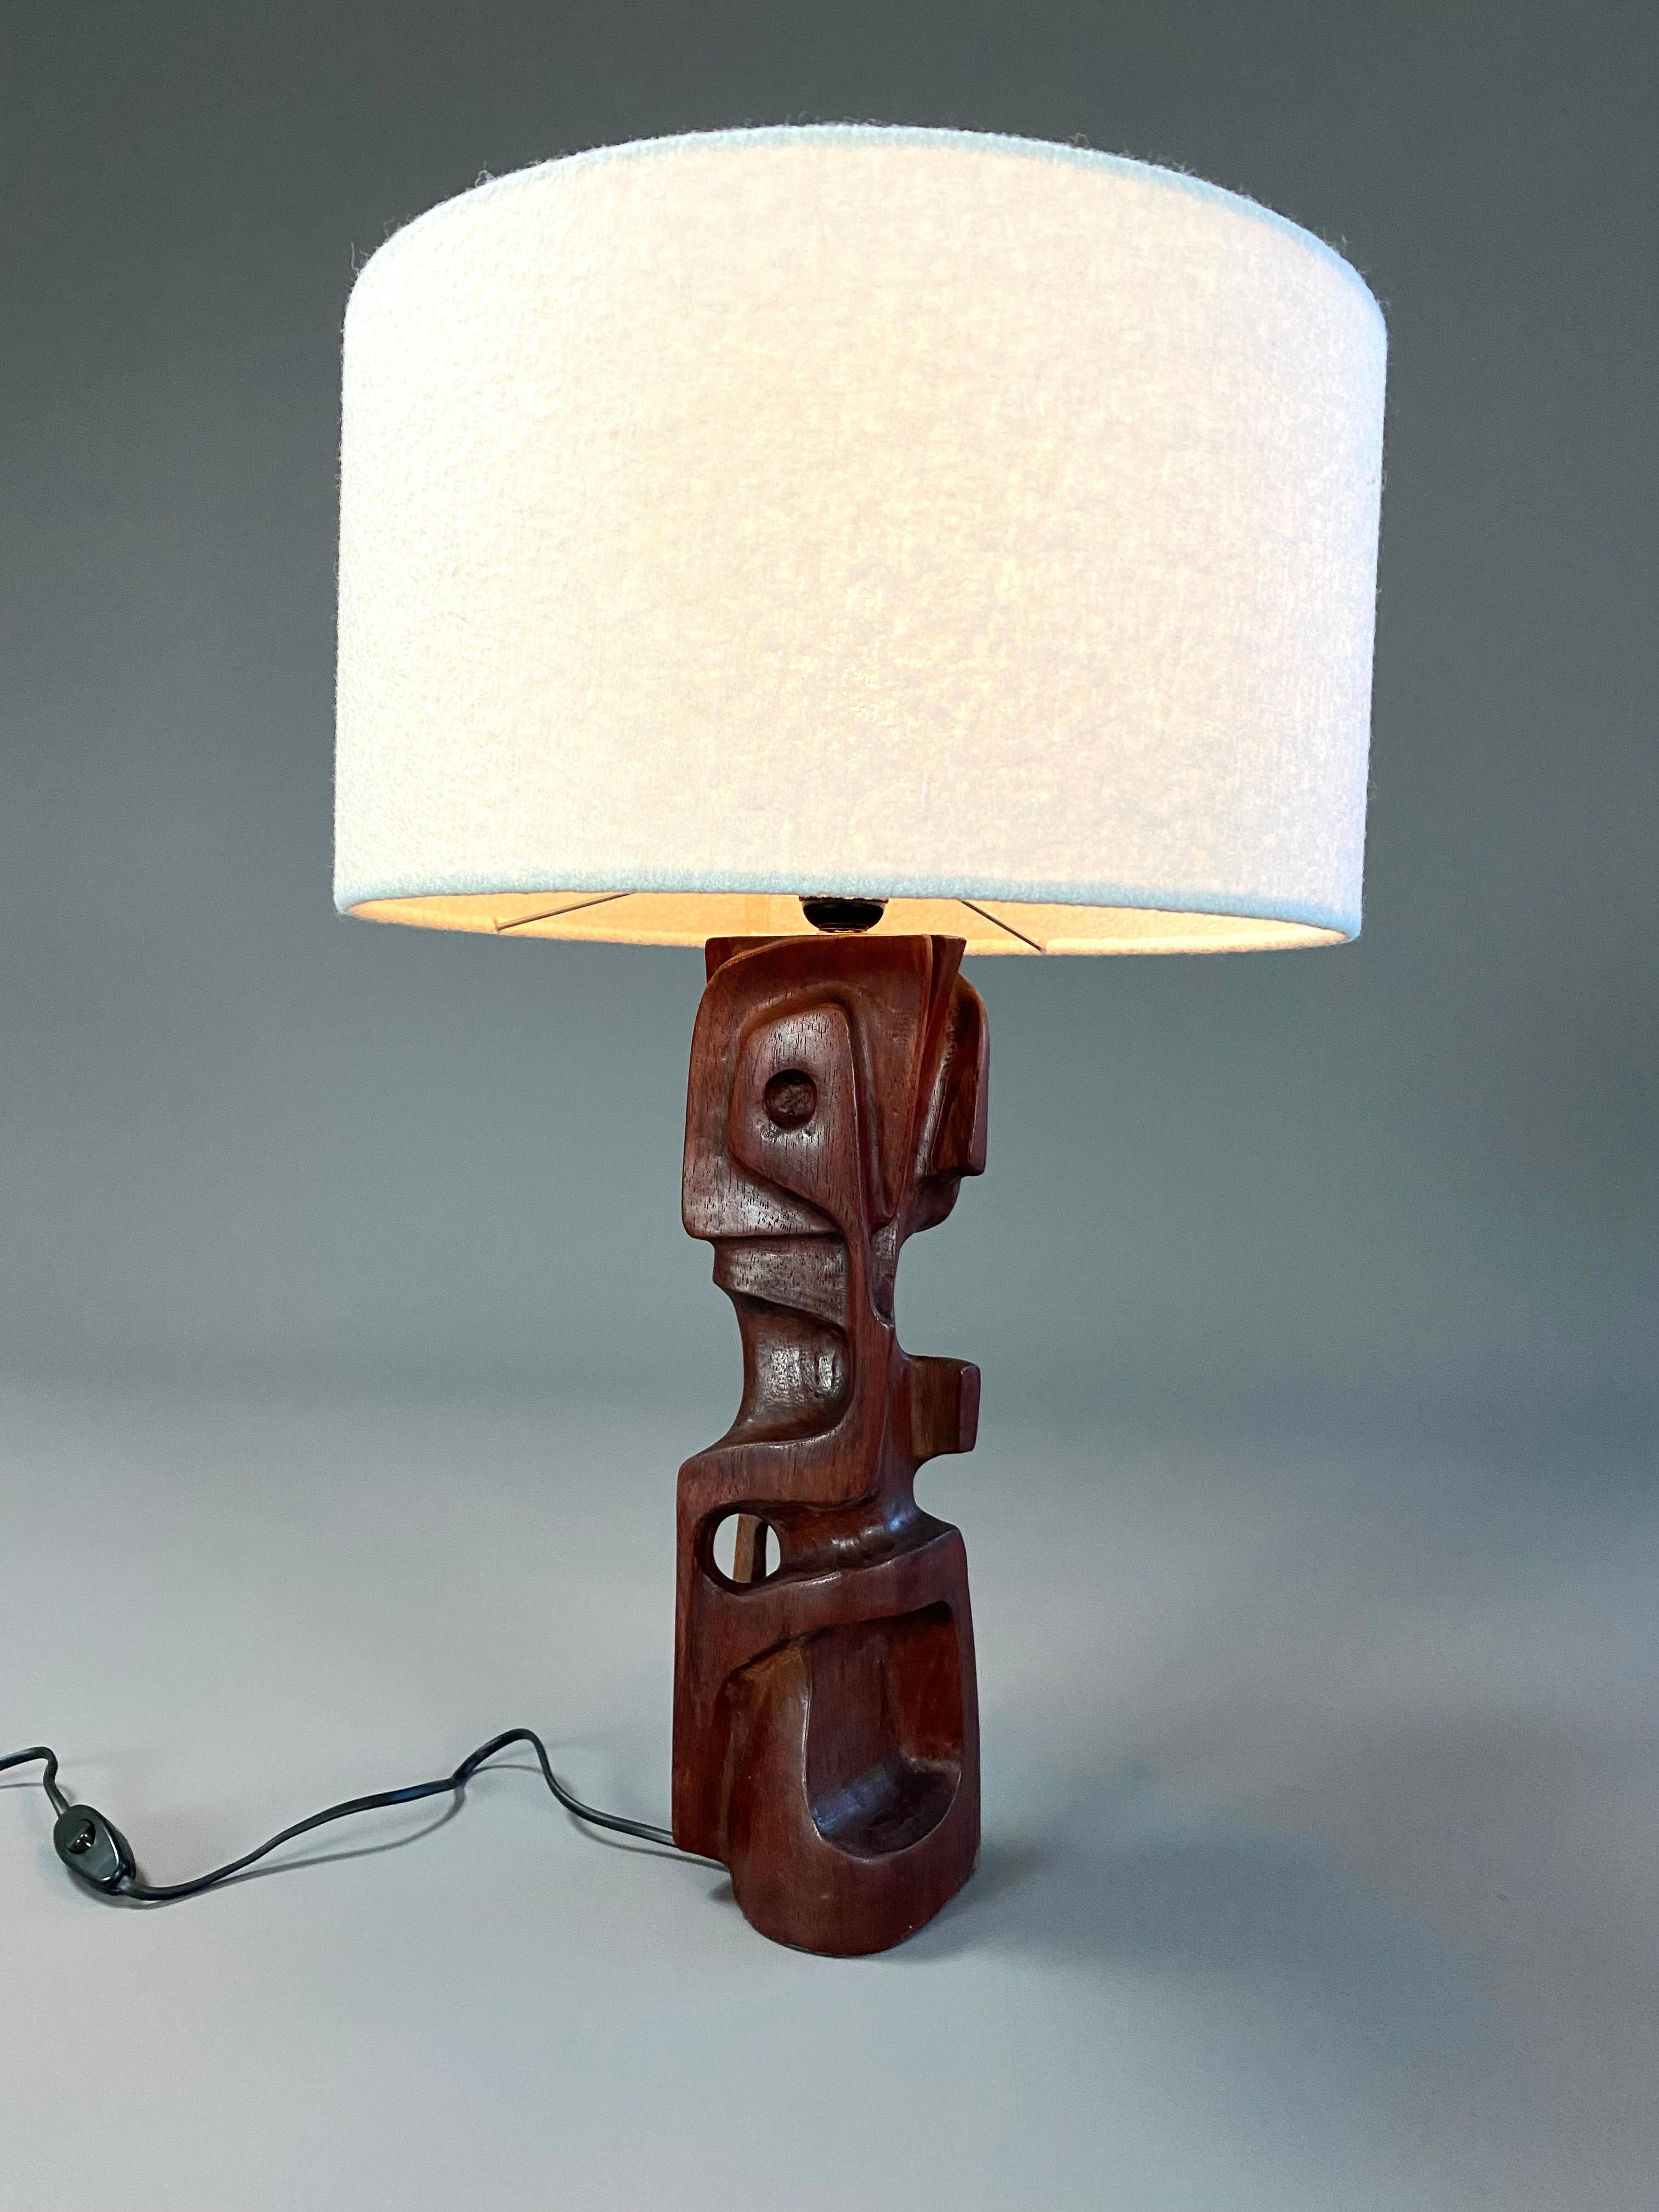 Unique pair of hand carved wooden sculptural table lamps made by Gianni Pinna. The wooden sculptures, lamps, are in great condition. No cracks nor damage. Please note that the two lamps differ slightly in color. One is brownish while the other one